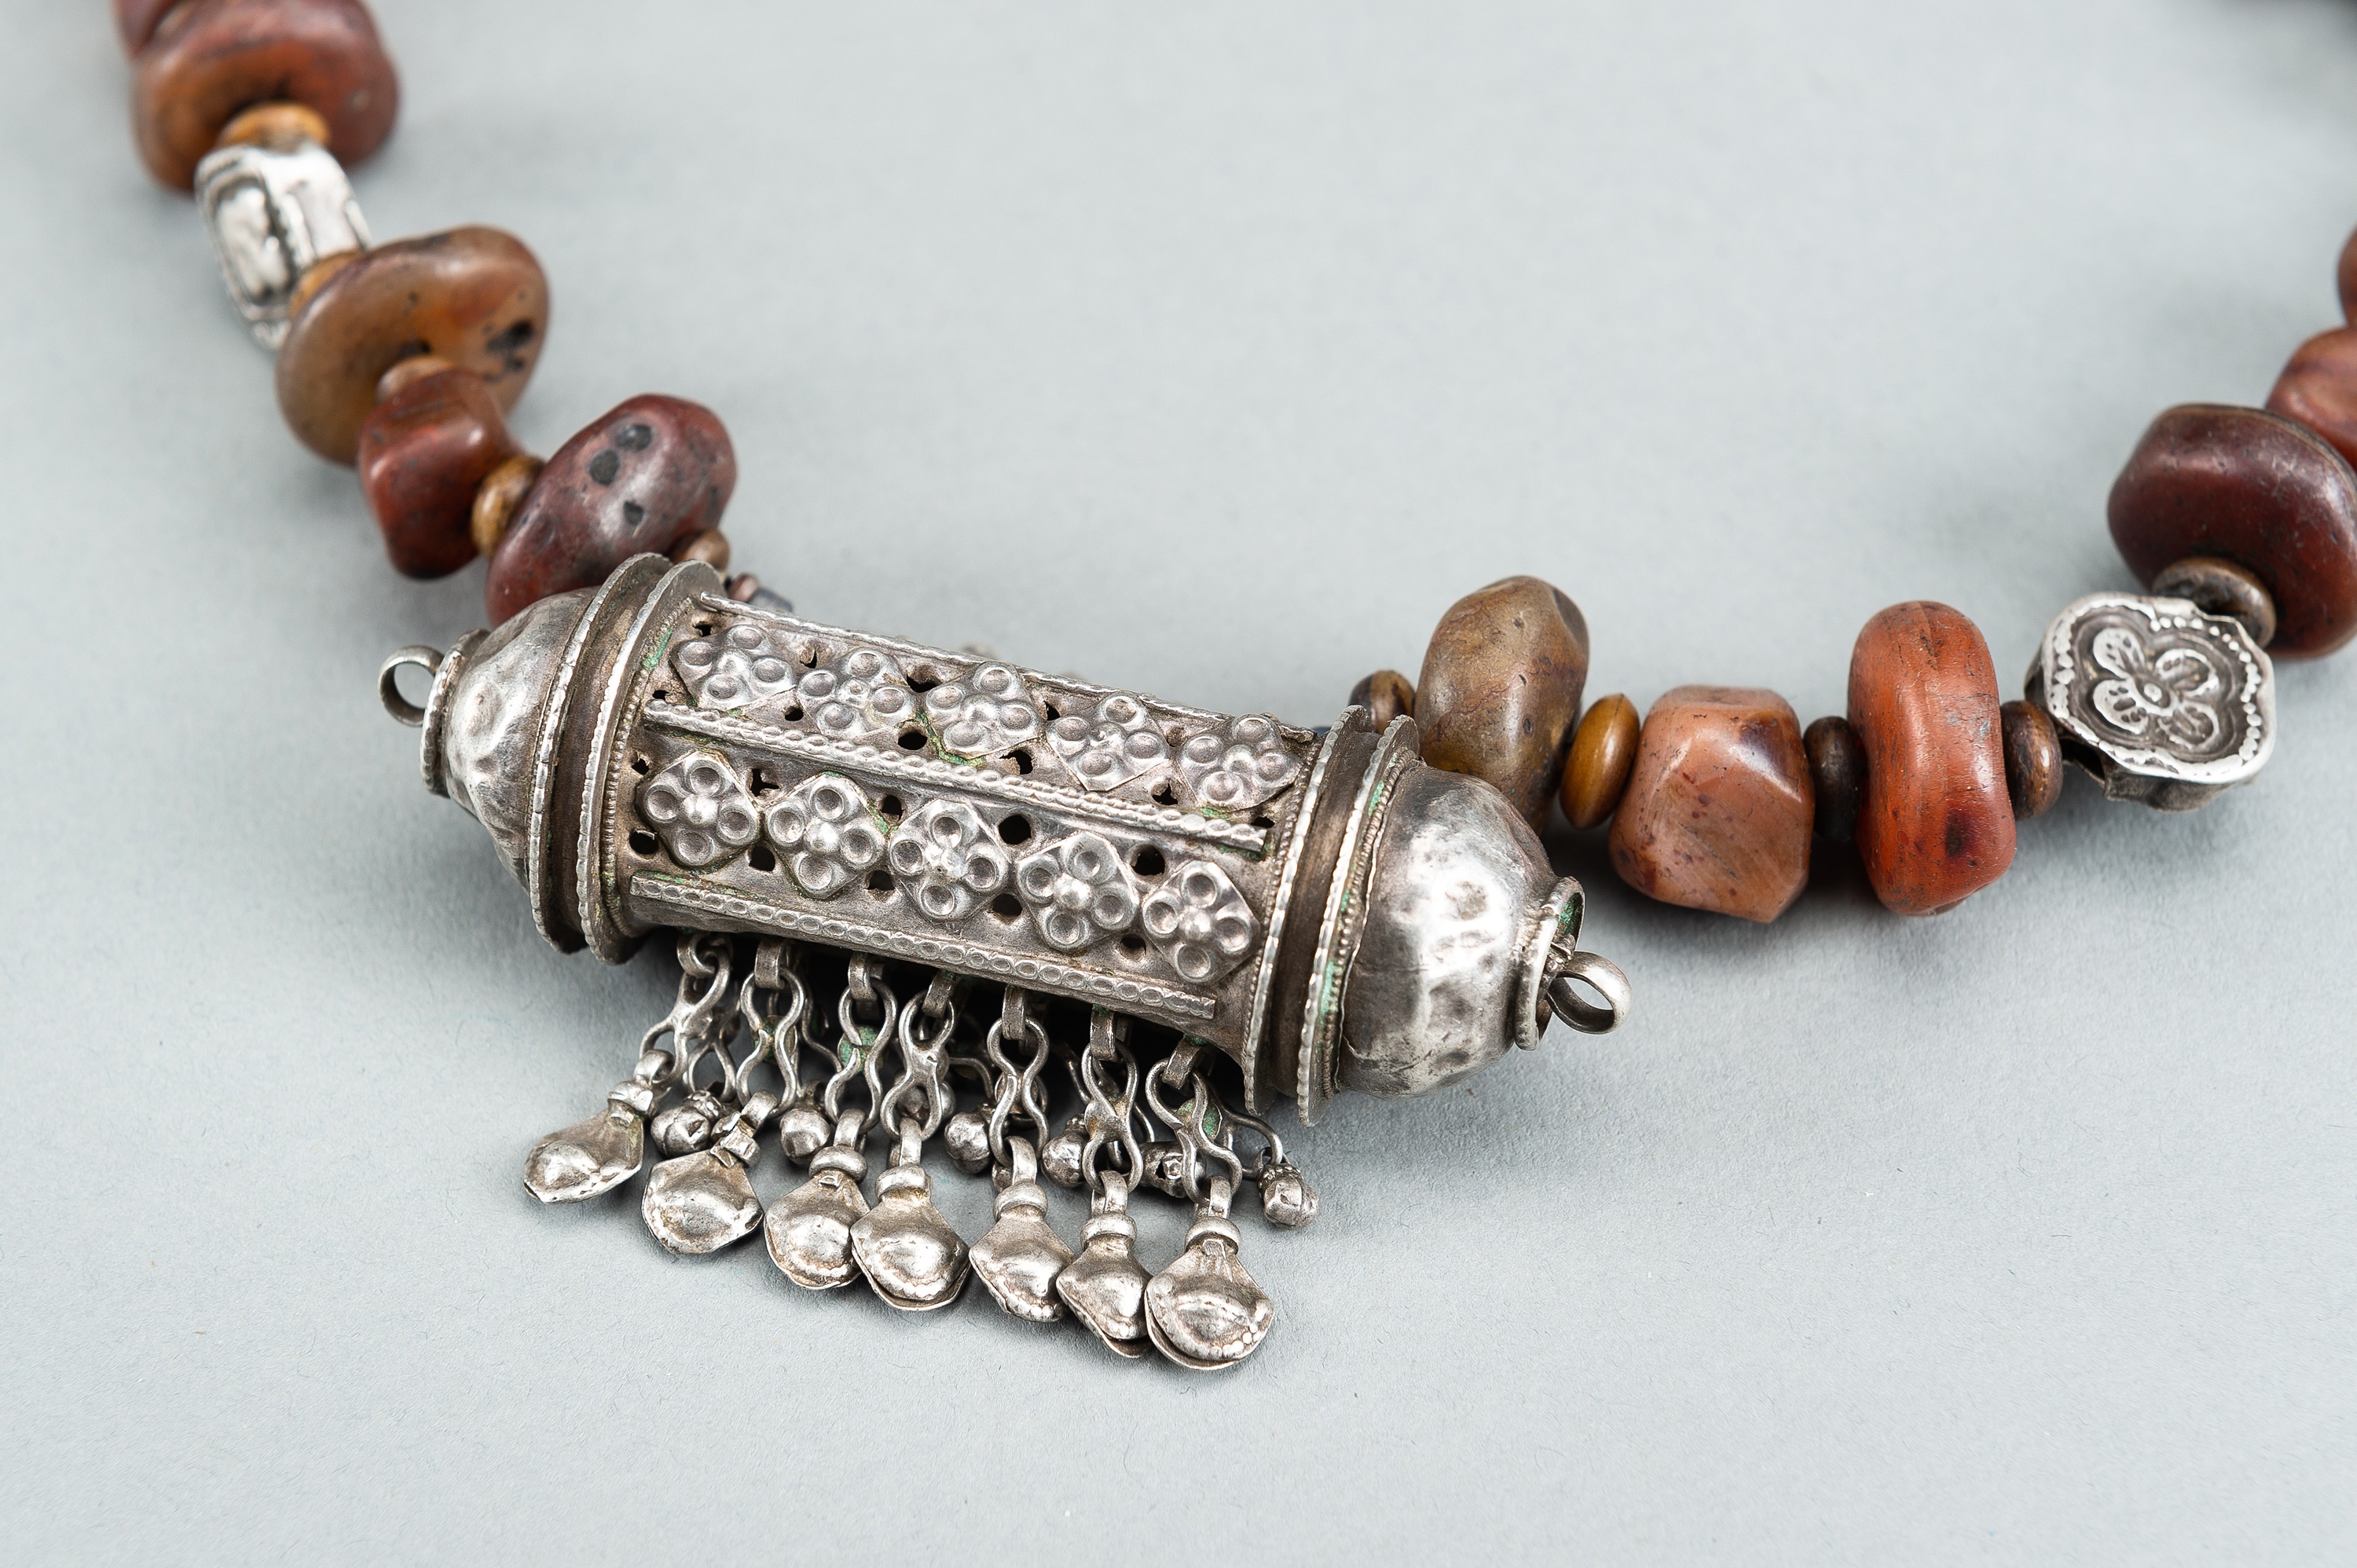 A SILVER AND GLASS AMULET PENDANT NECKLACE, c. 1900s - Image 11 of 13